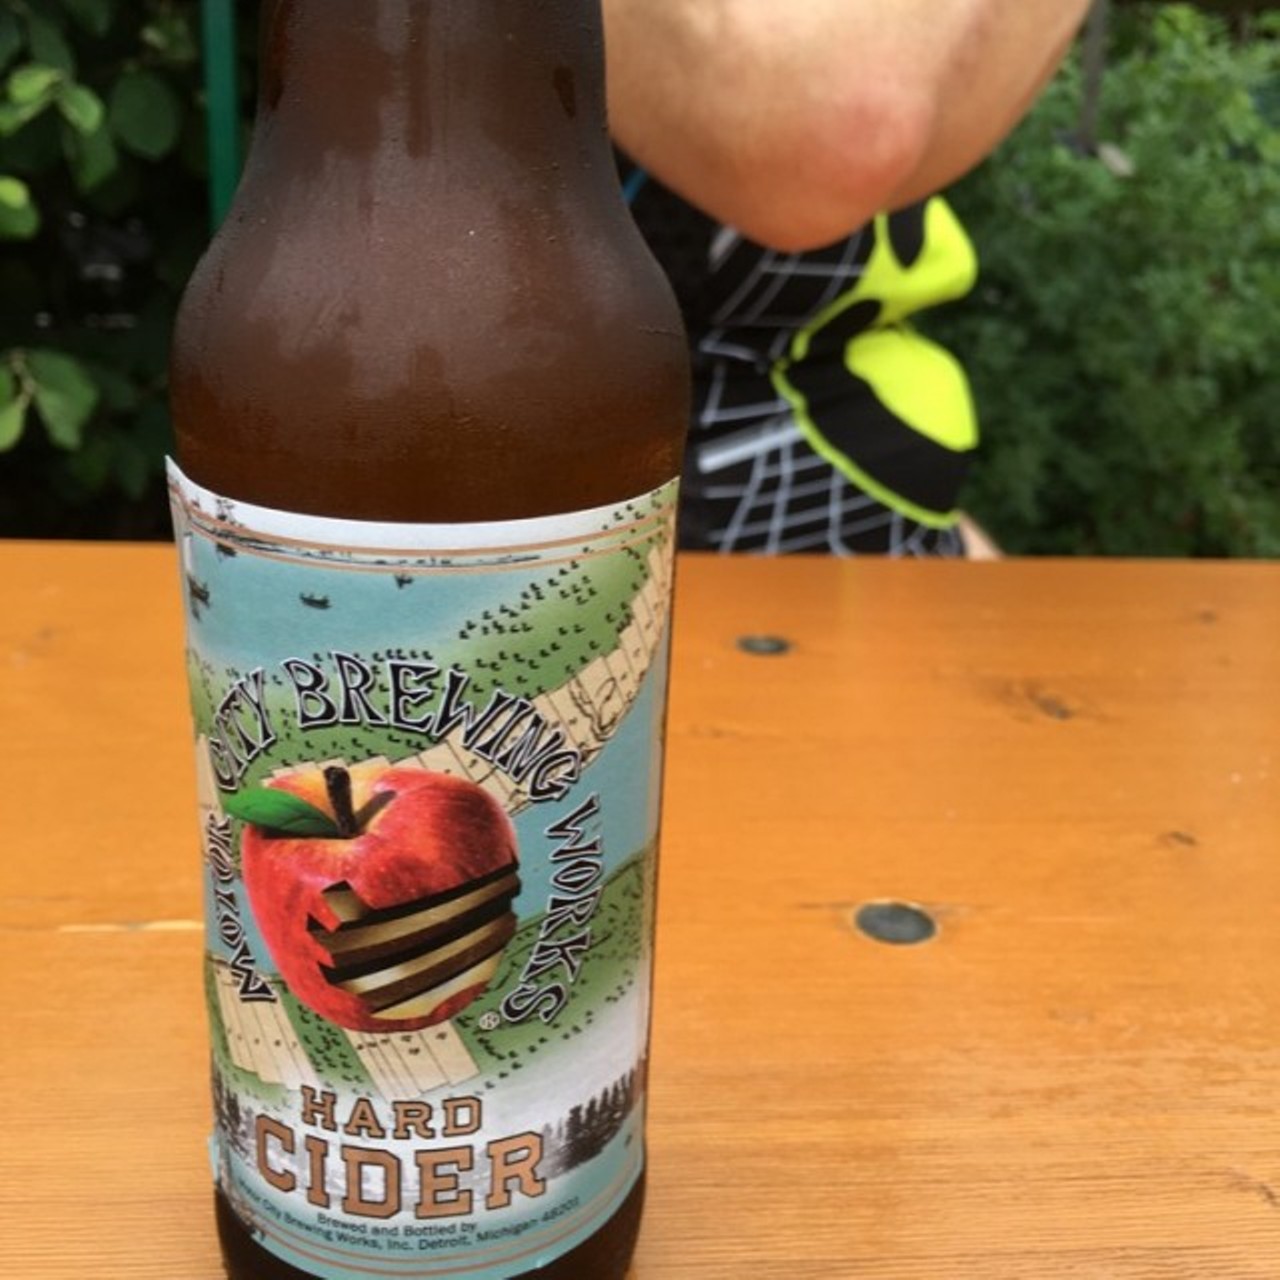 Hard Cider
6.3& ABV 
Simply named hard Cider, this brew from Motor City Brewing Works is such a classic. Michigan-grown apples make for a delicious dry cider.